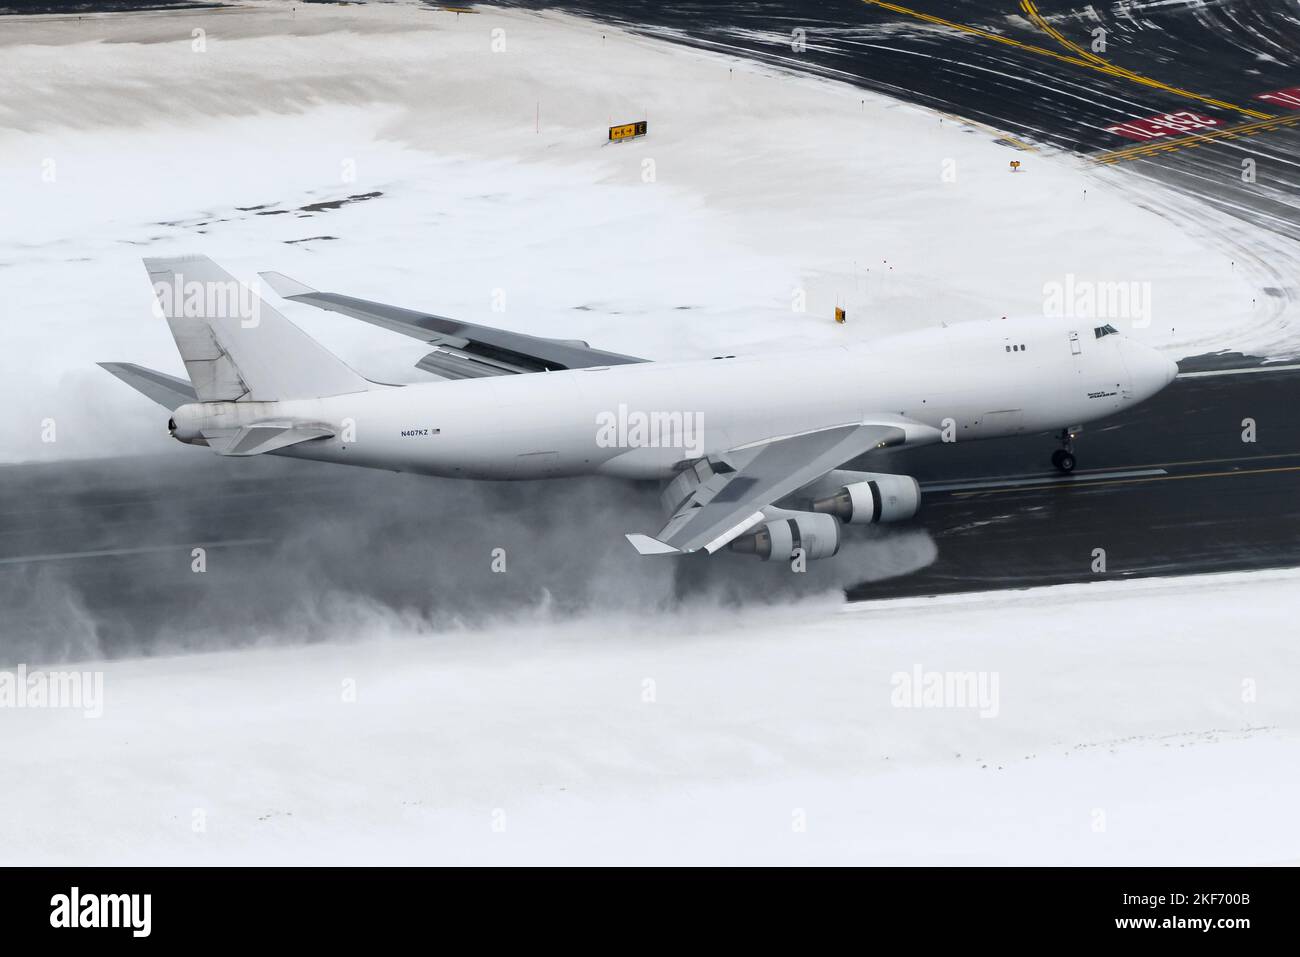 Boeing 747 cargo aircraft landing at Anchorage Airport after a heavy snow fall. Airplane 747-400F of Atlas Air with engines reverse thrust open. Stock Photo